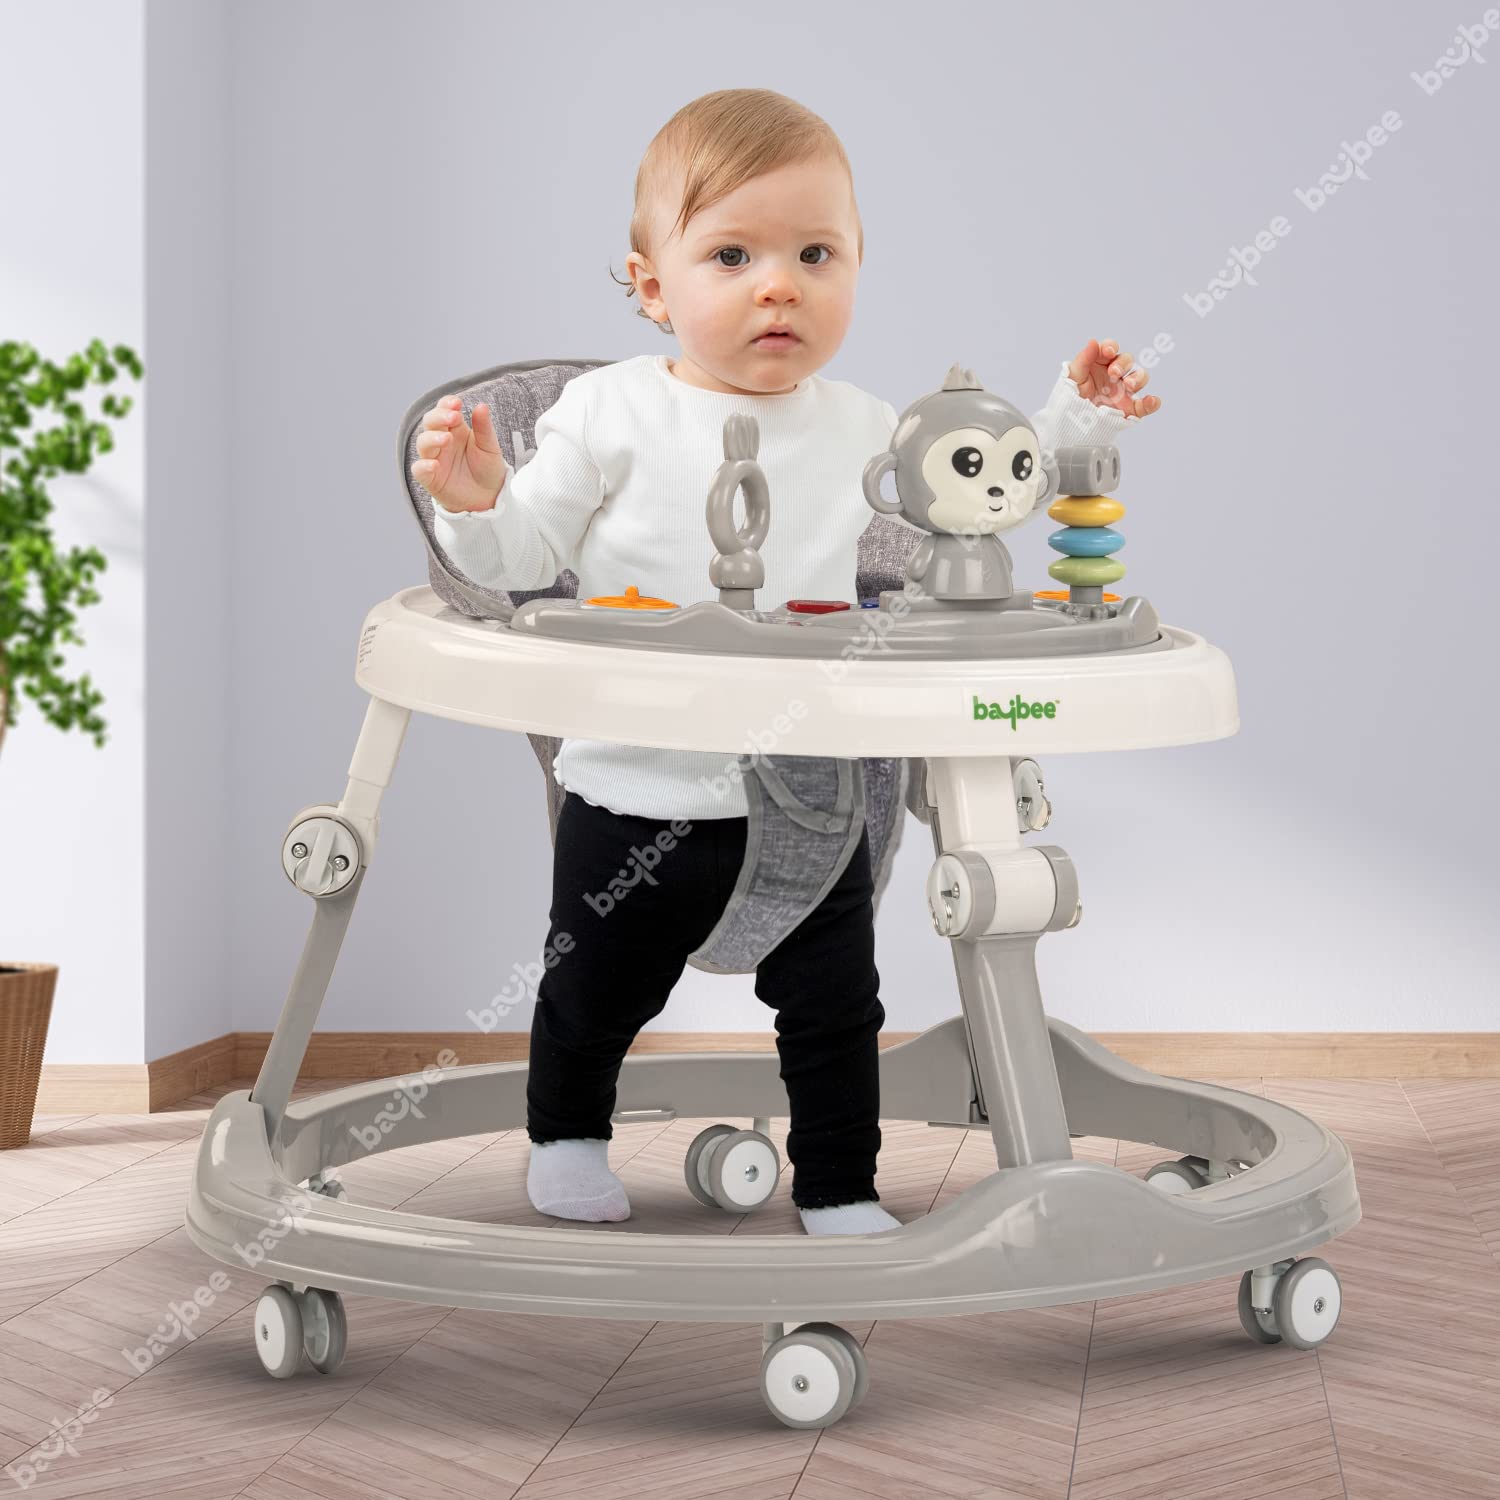 Baybee Drono Baby Walker for Kids, Round Kids Walker with 4 Seat Height Adjustable | Activity Walker for Baby with with Food Tray & Musical Toy Bar | Walker for Baby 6-18 Months Boys Girls (Green)